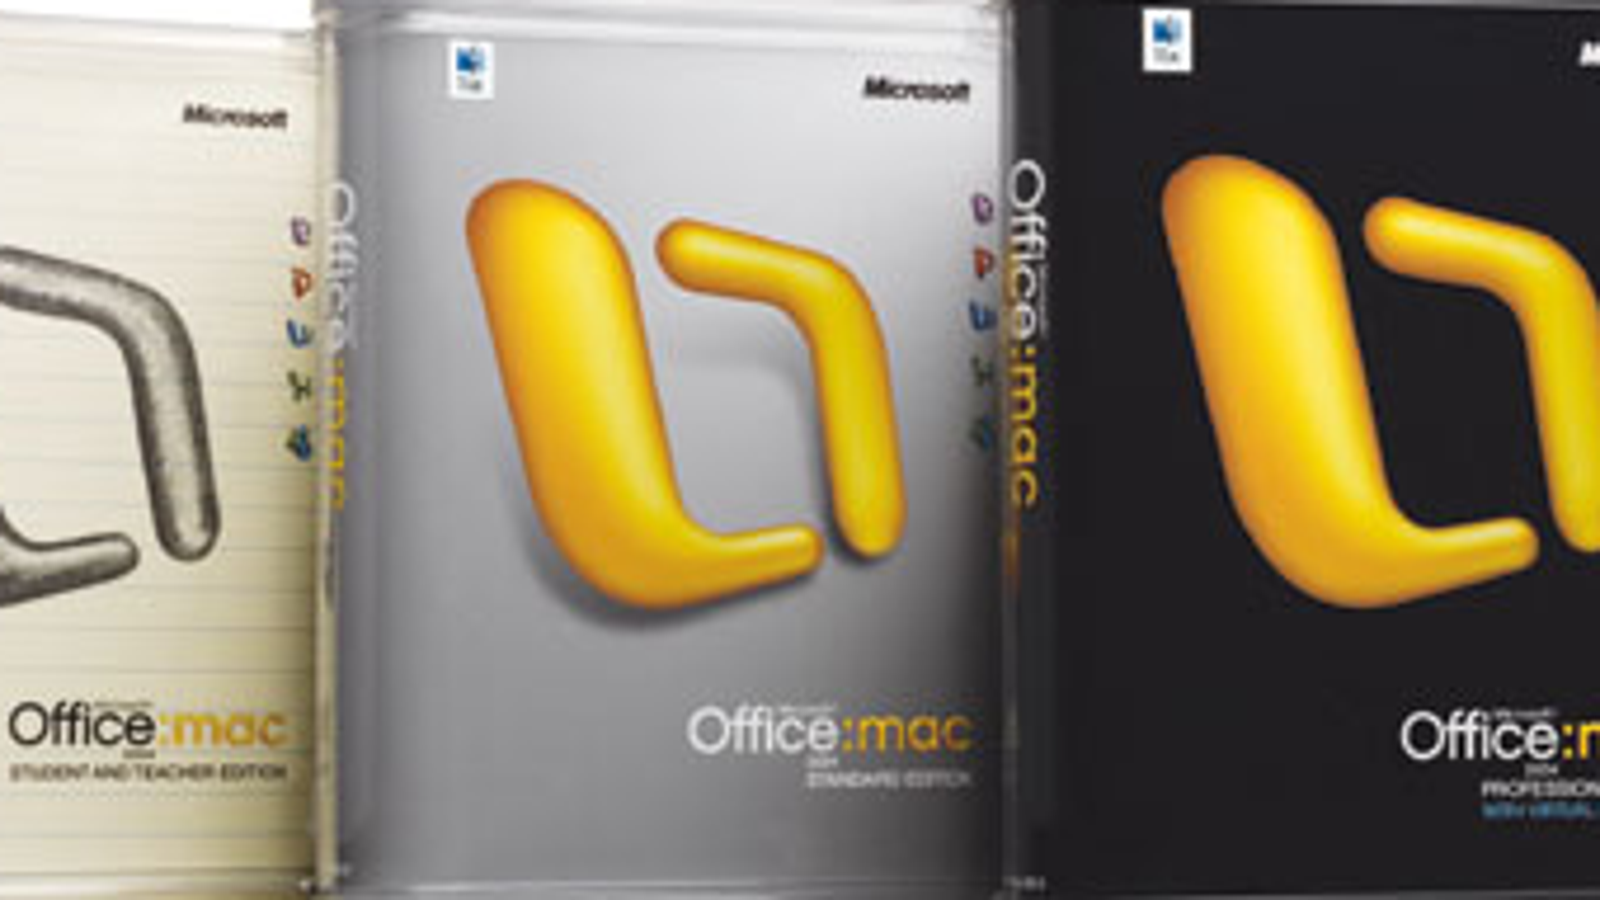 upgrade microsoft office for mac from 2008 to 2011